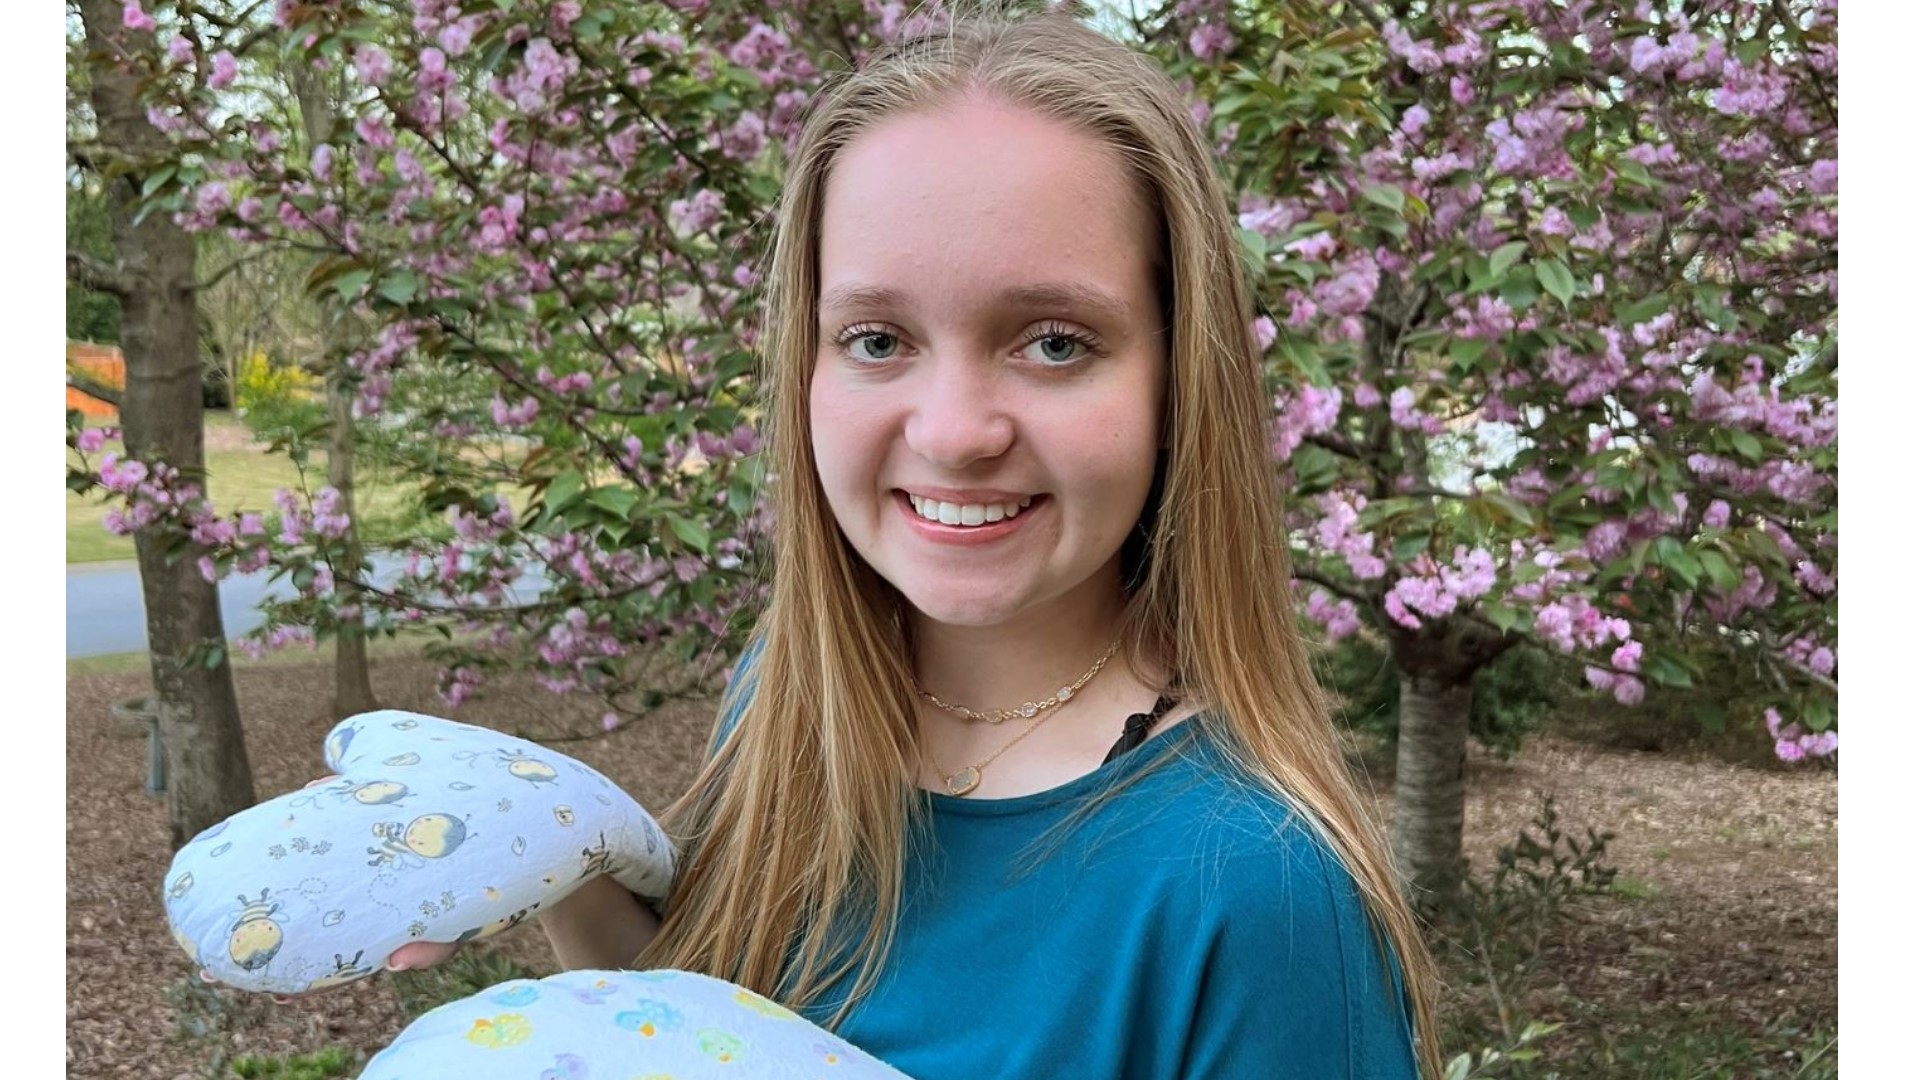 When Buford teen Bryn Hammock was stuck in quarantine, she decided to put her sewing skills to the test.